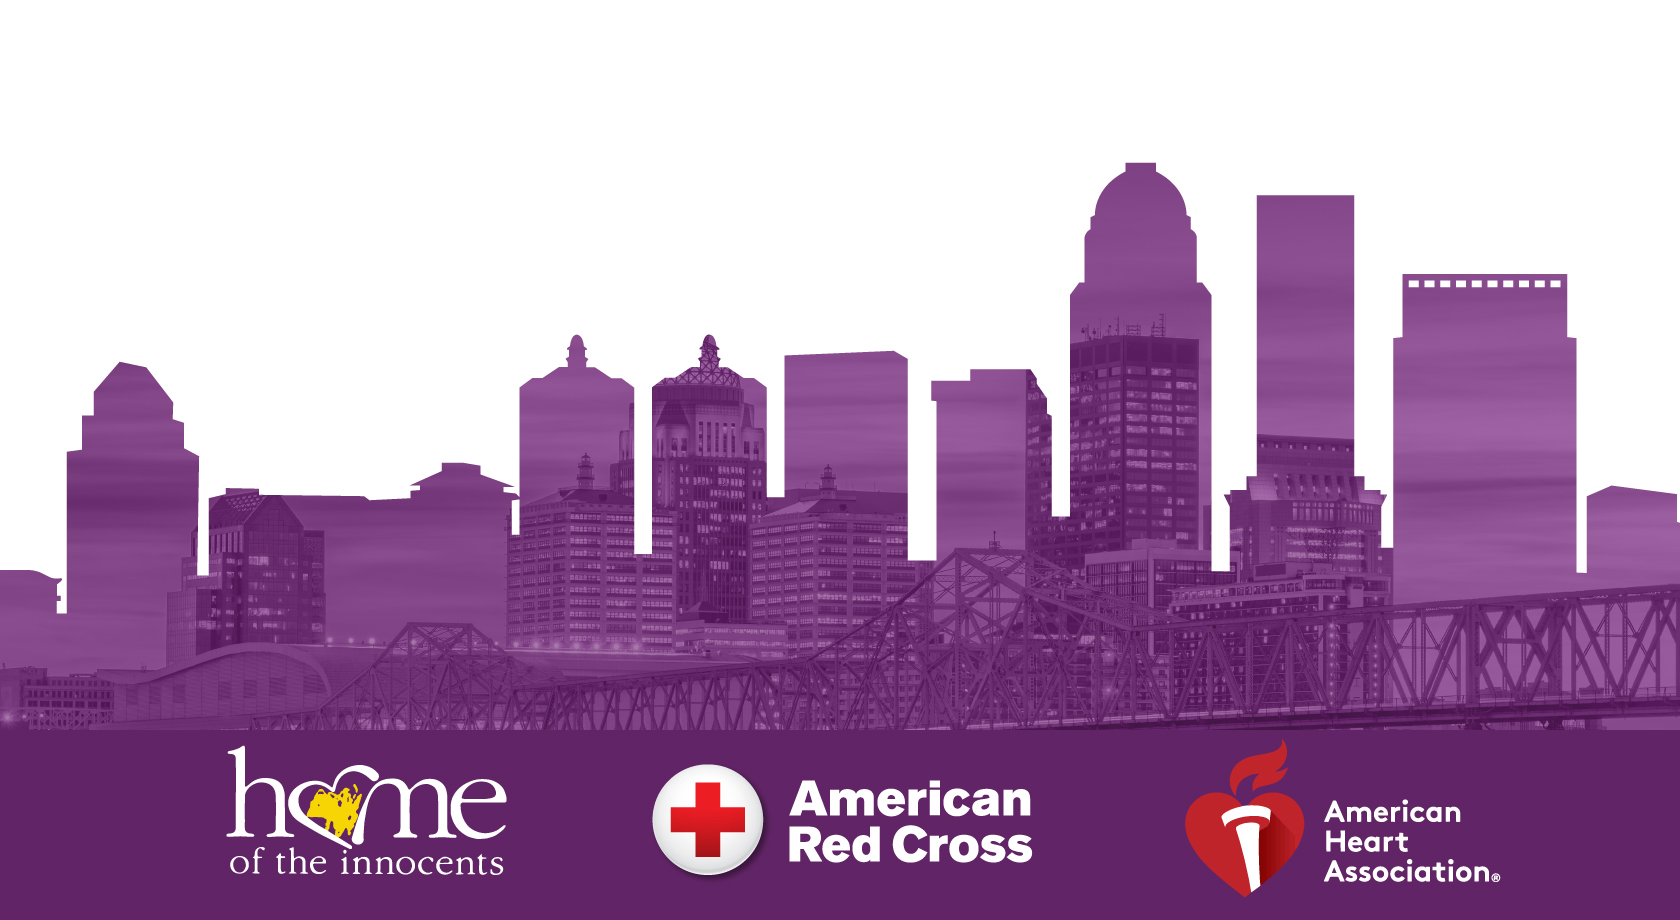 Graphic of Louisville, KY skyline with Home of the Innocents, American Red Cross, and American Heart Association Logos